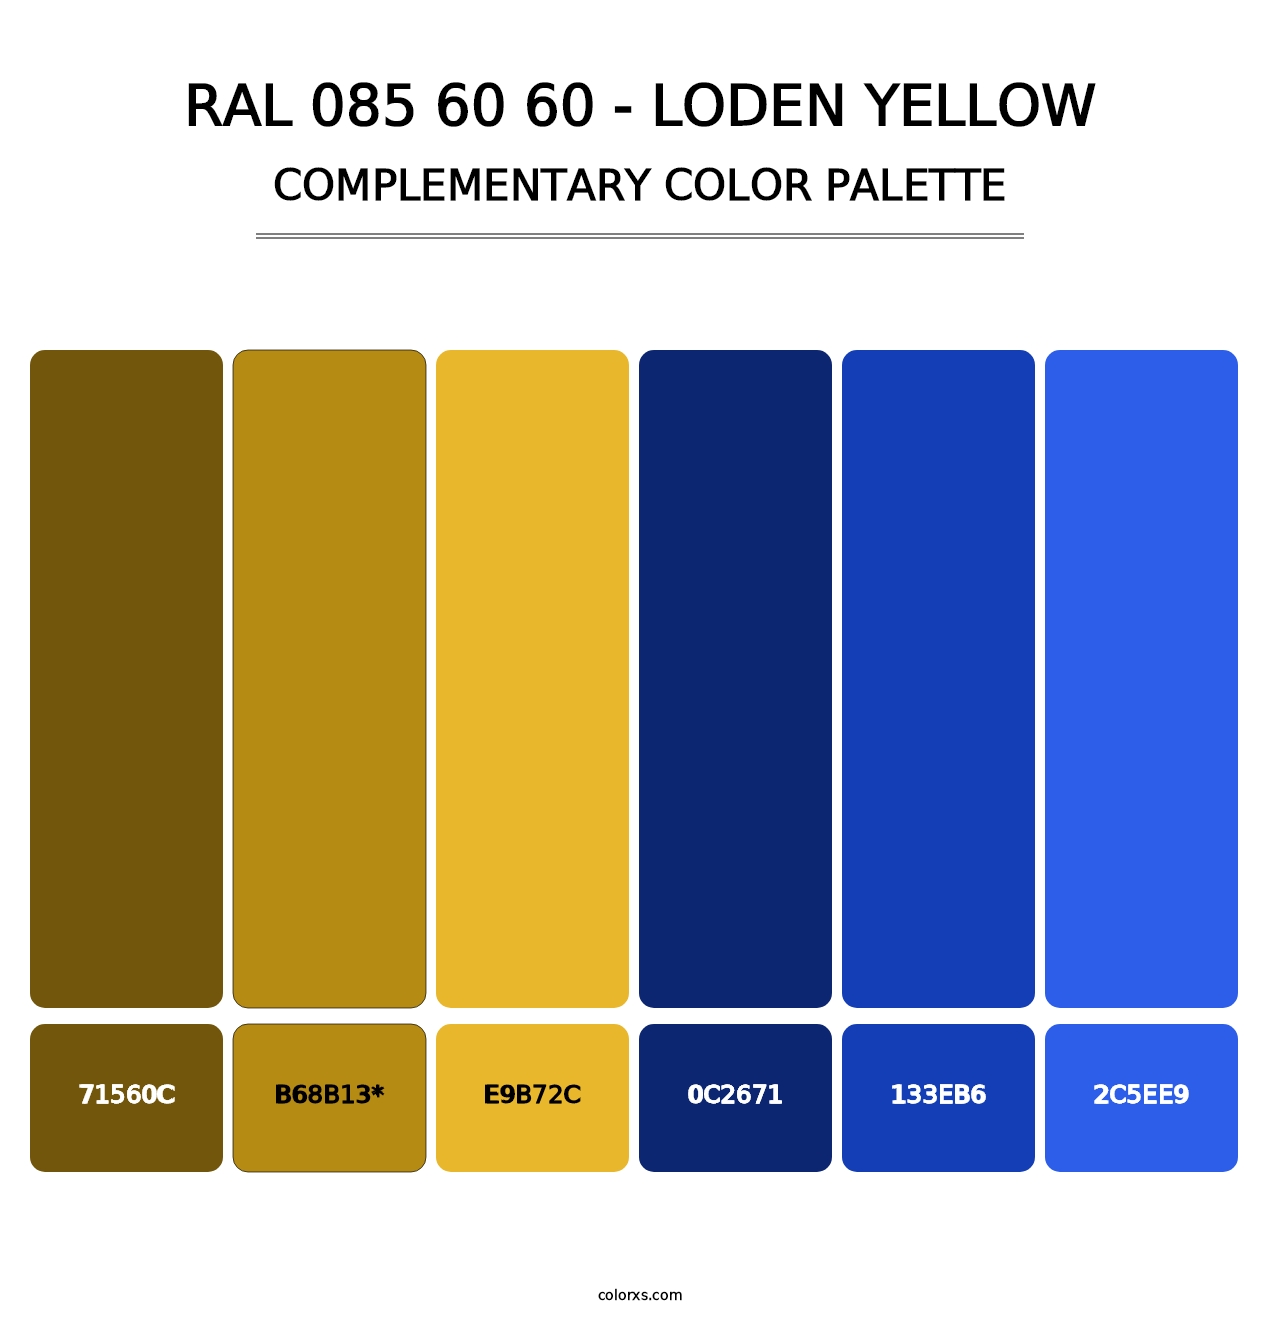 RAL 085 60 60 - Loden Yellow - Complementary Color Palette